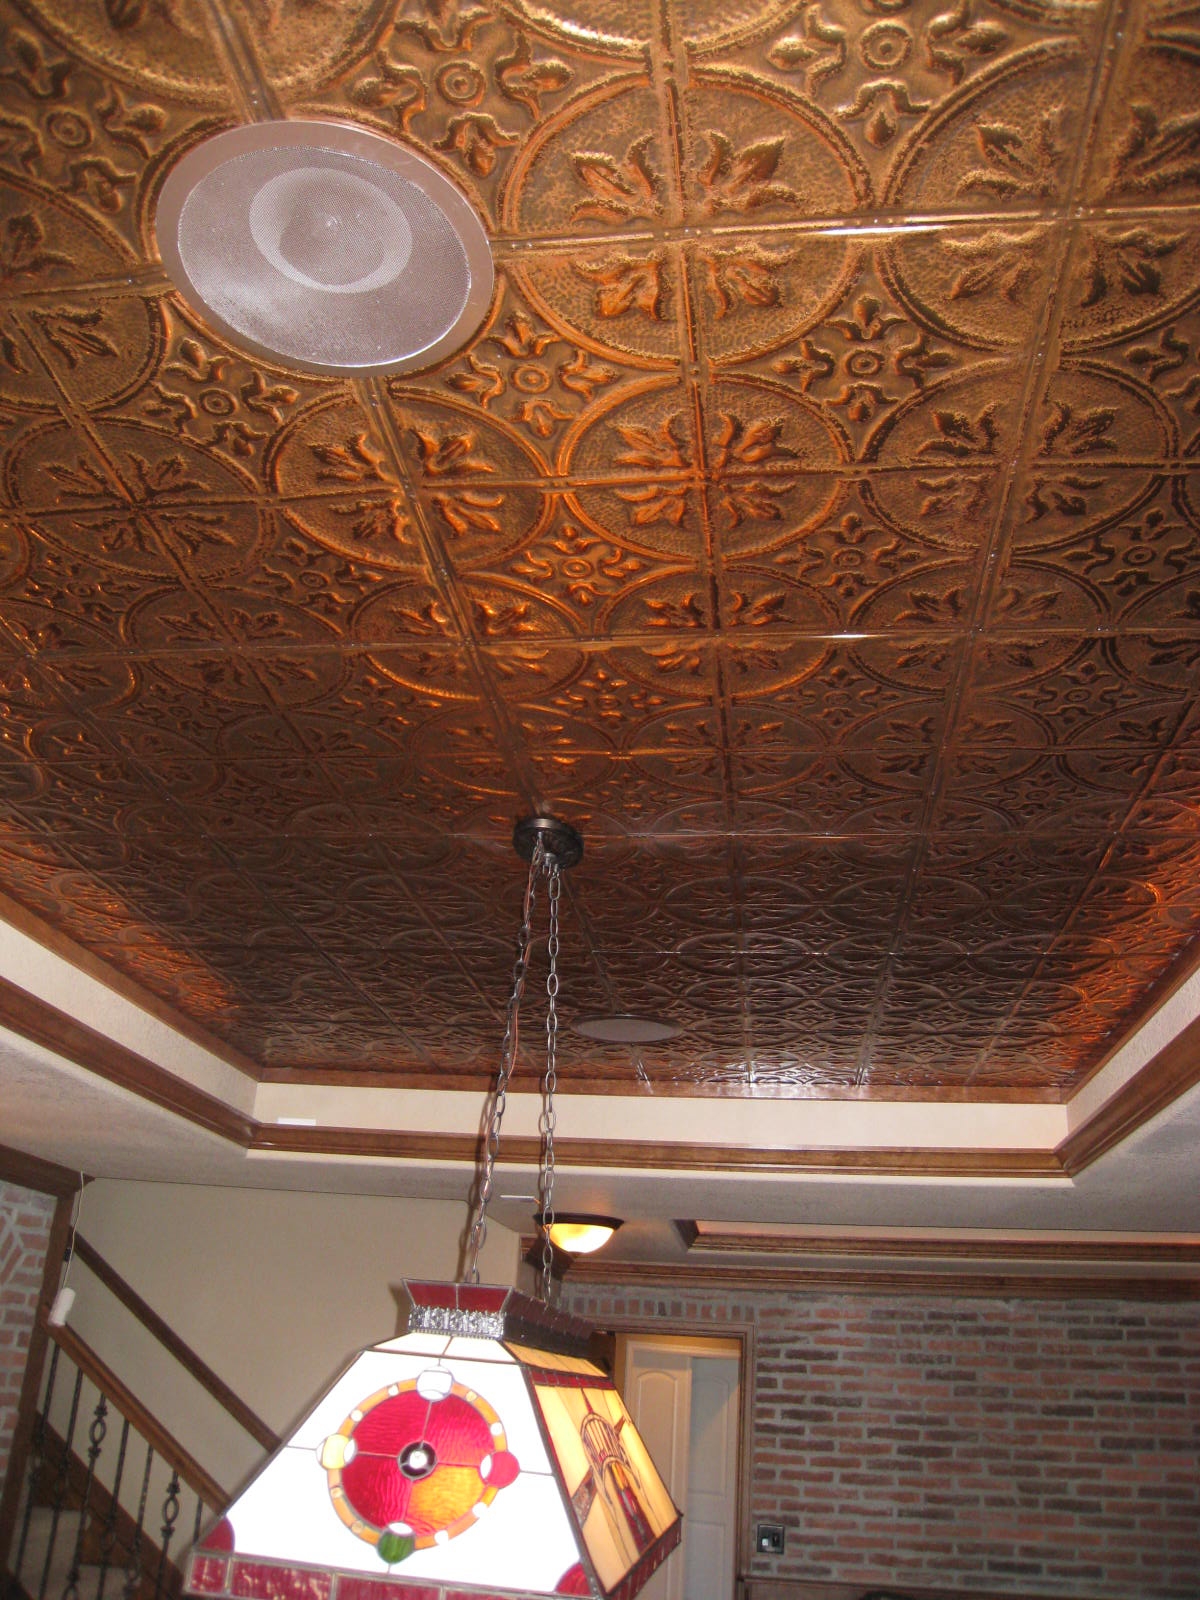 Stamped Copper Ceiling Tiles